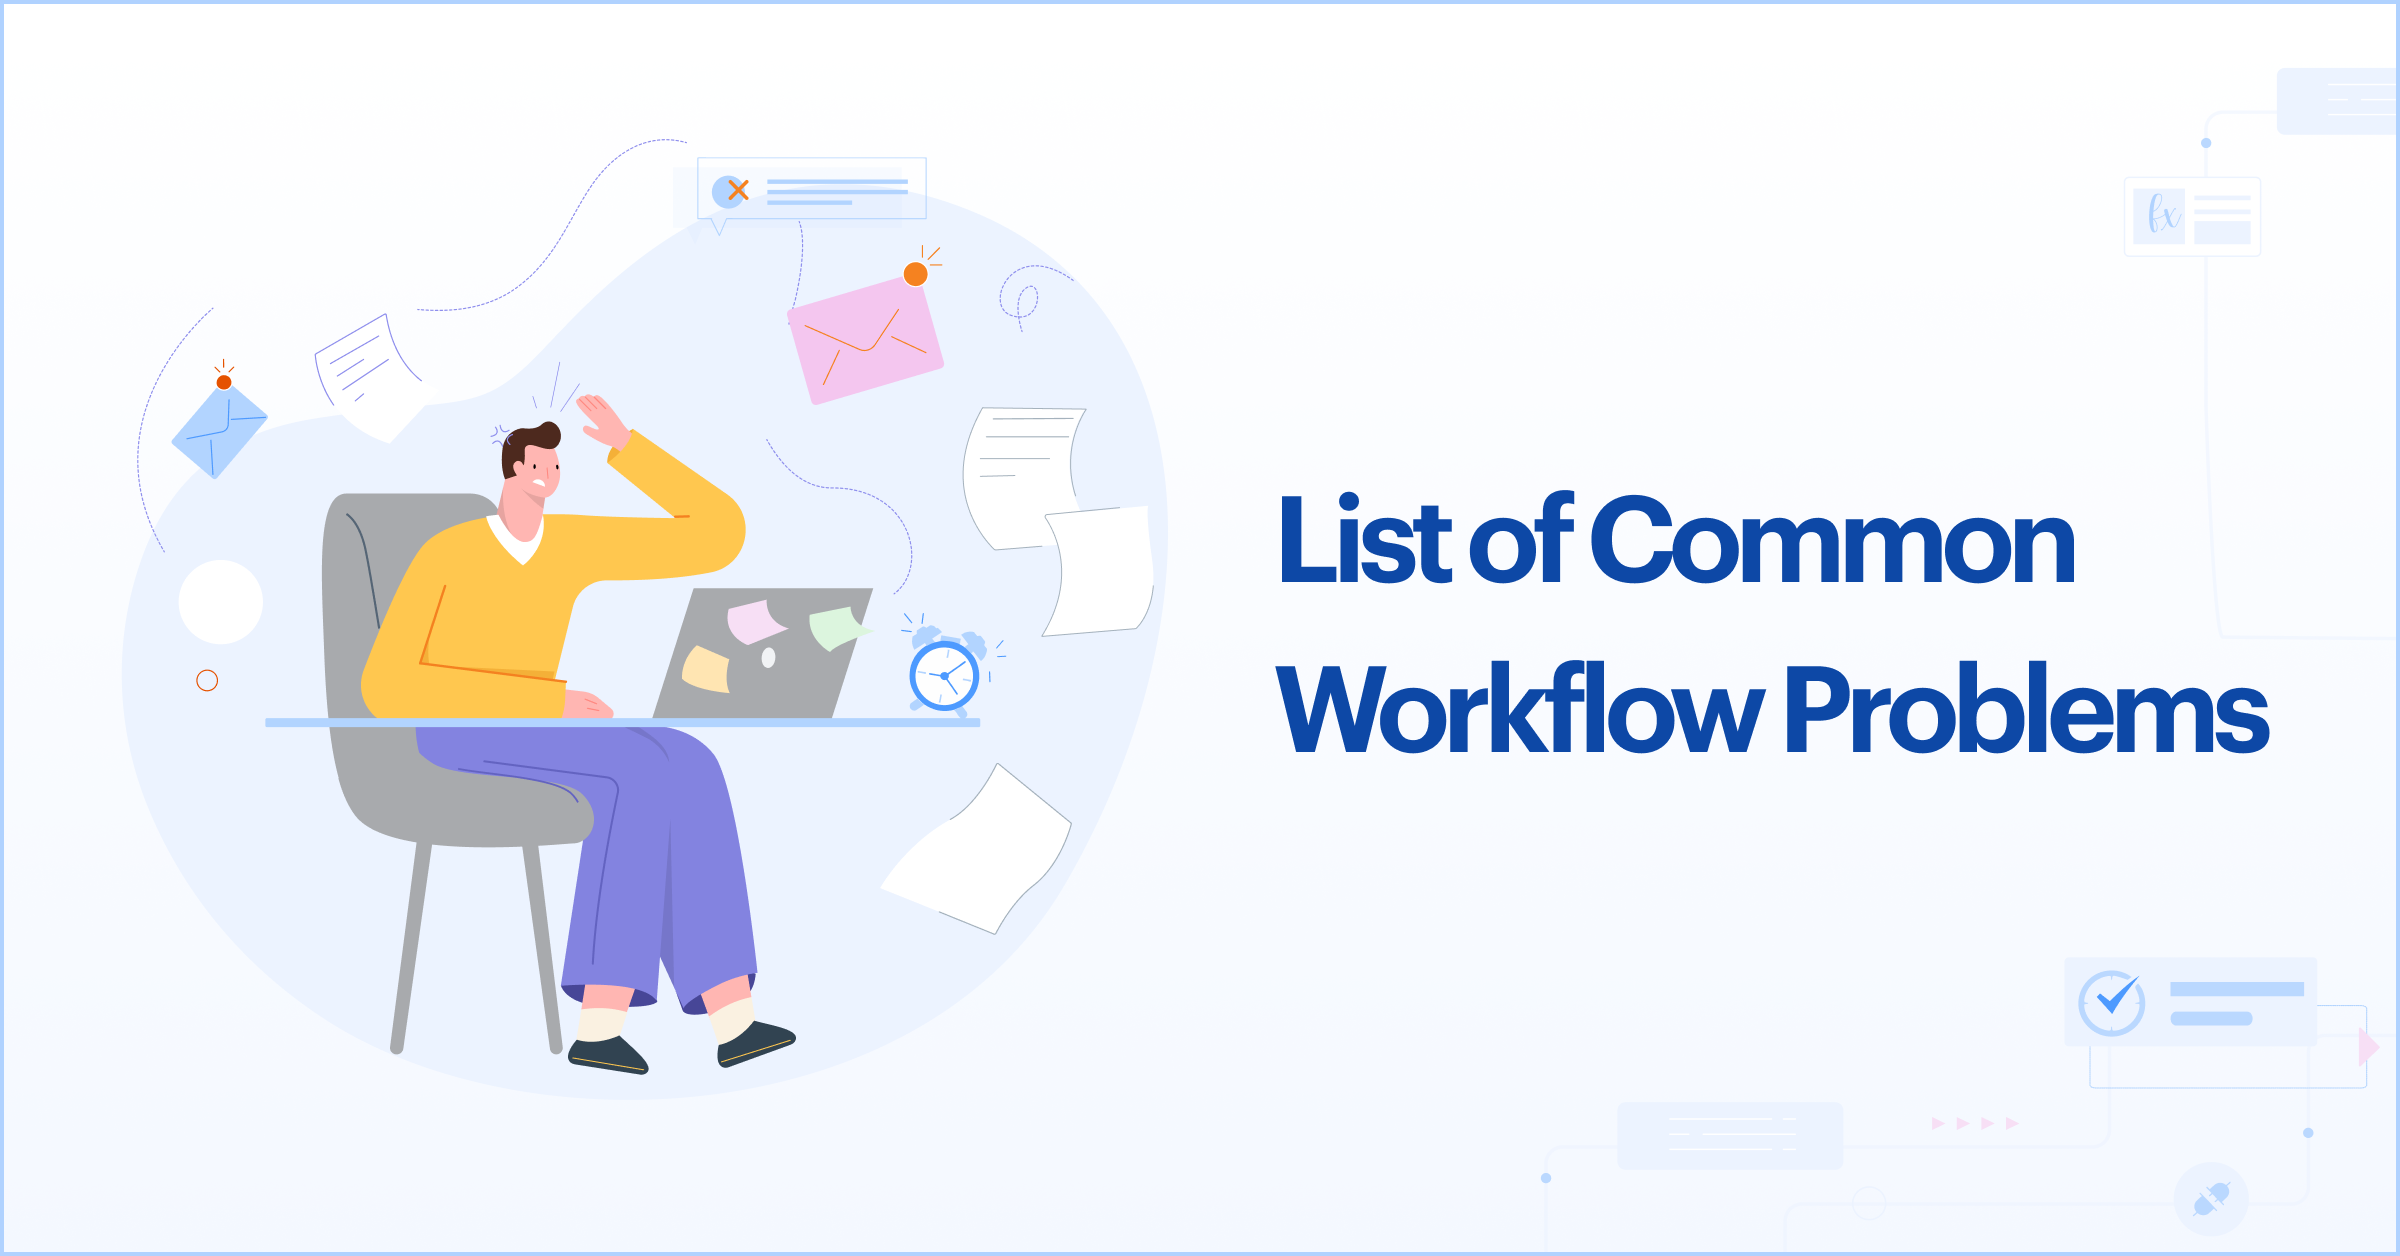 List of Common Workflow Problems